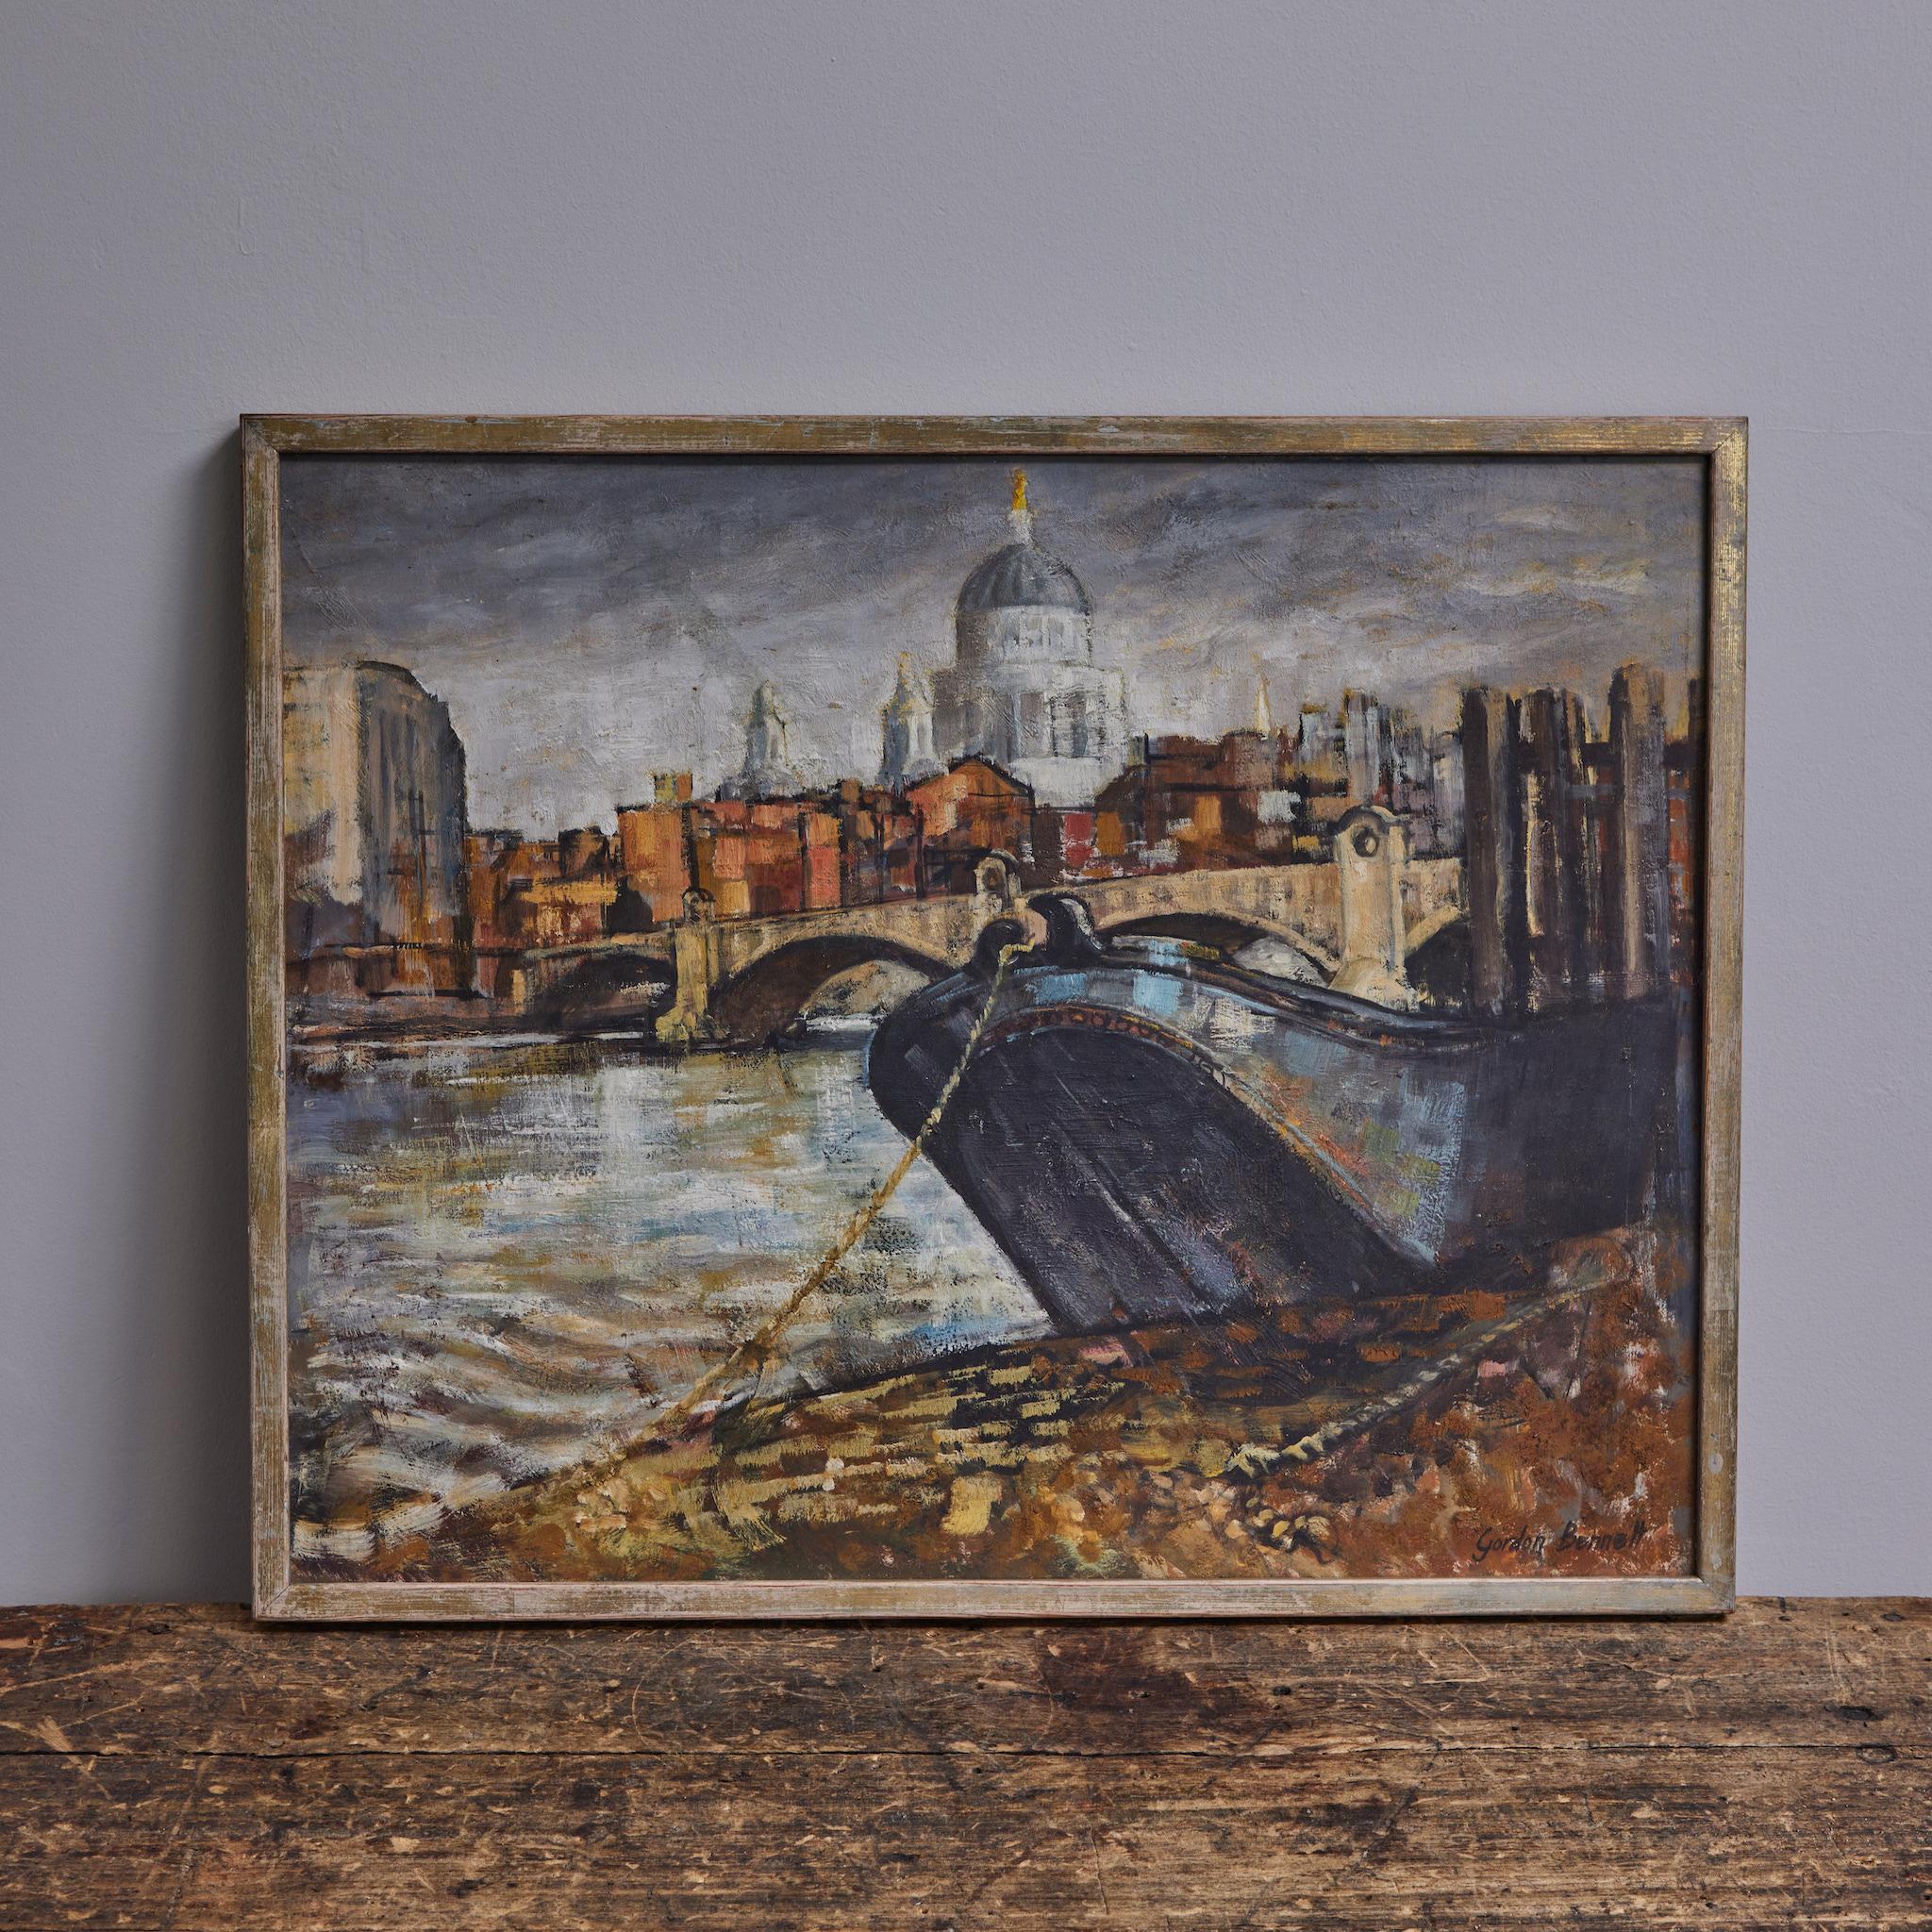 Moody scene of the River Thames by 20th-century English artist Gordon Bennett. Oil painting on board. A proud but contemplative piece, the palette of smoggy grays and warm burnt ochres evokes a dusky industrial atmosphere. 
